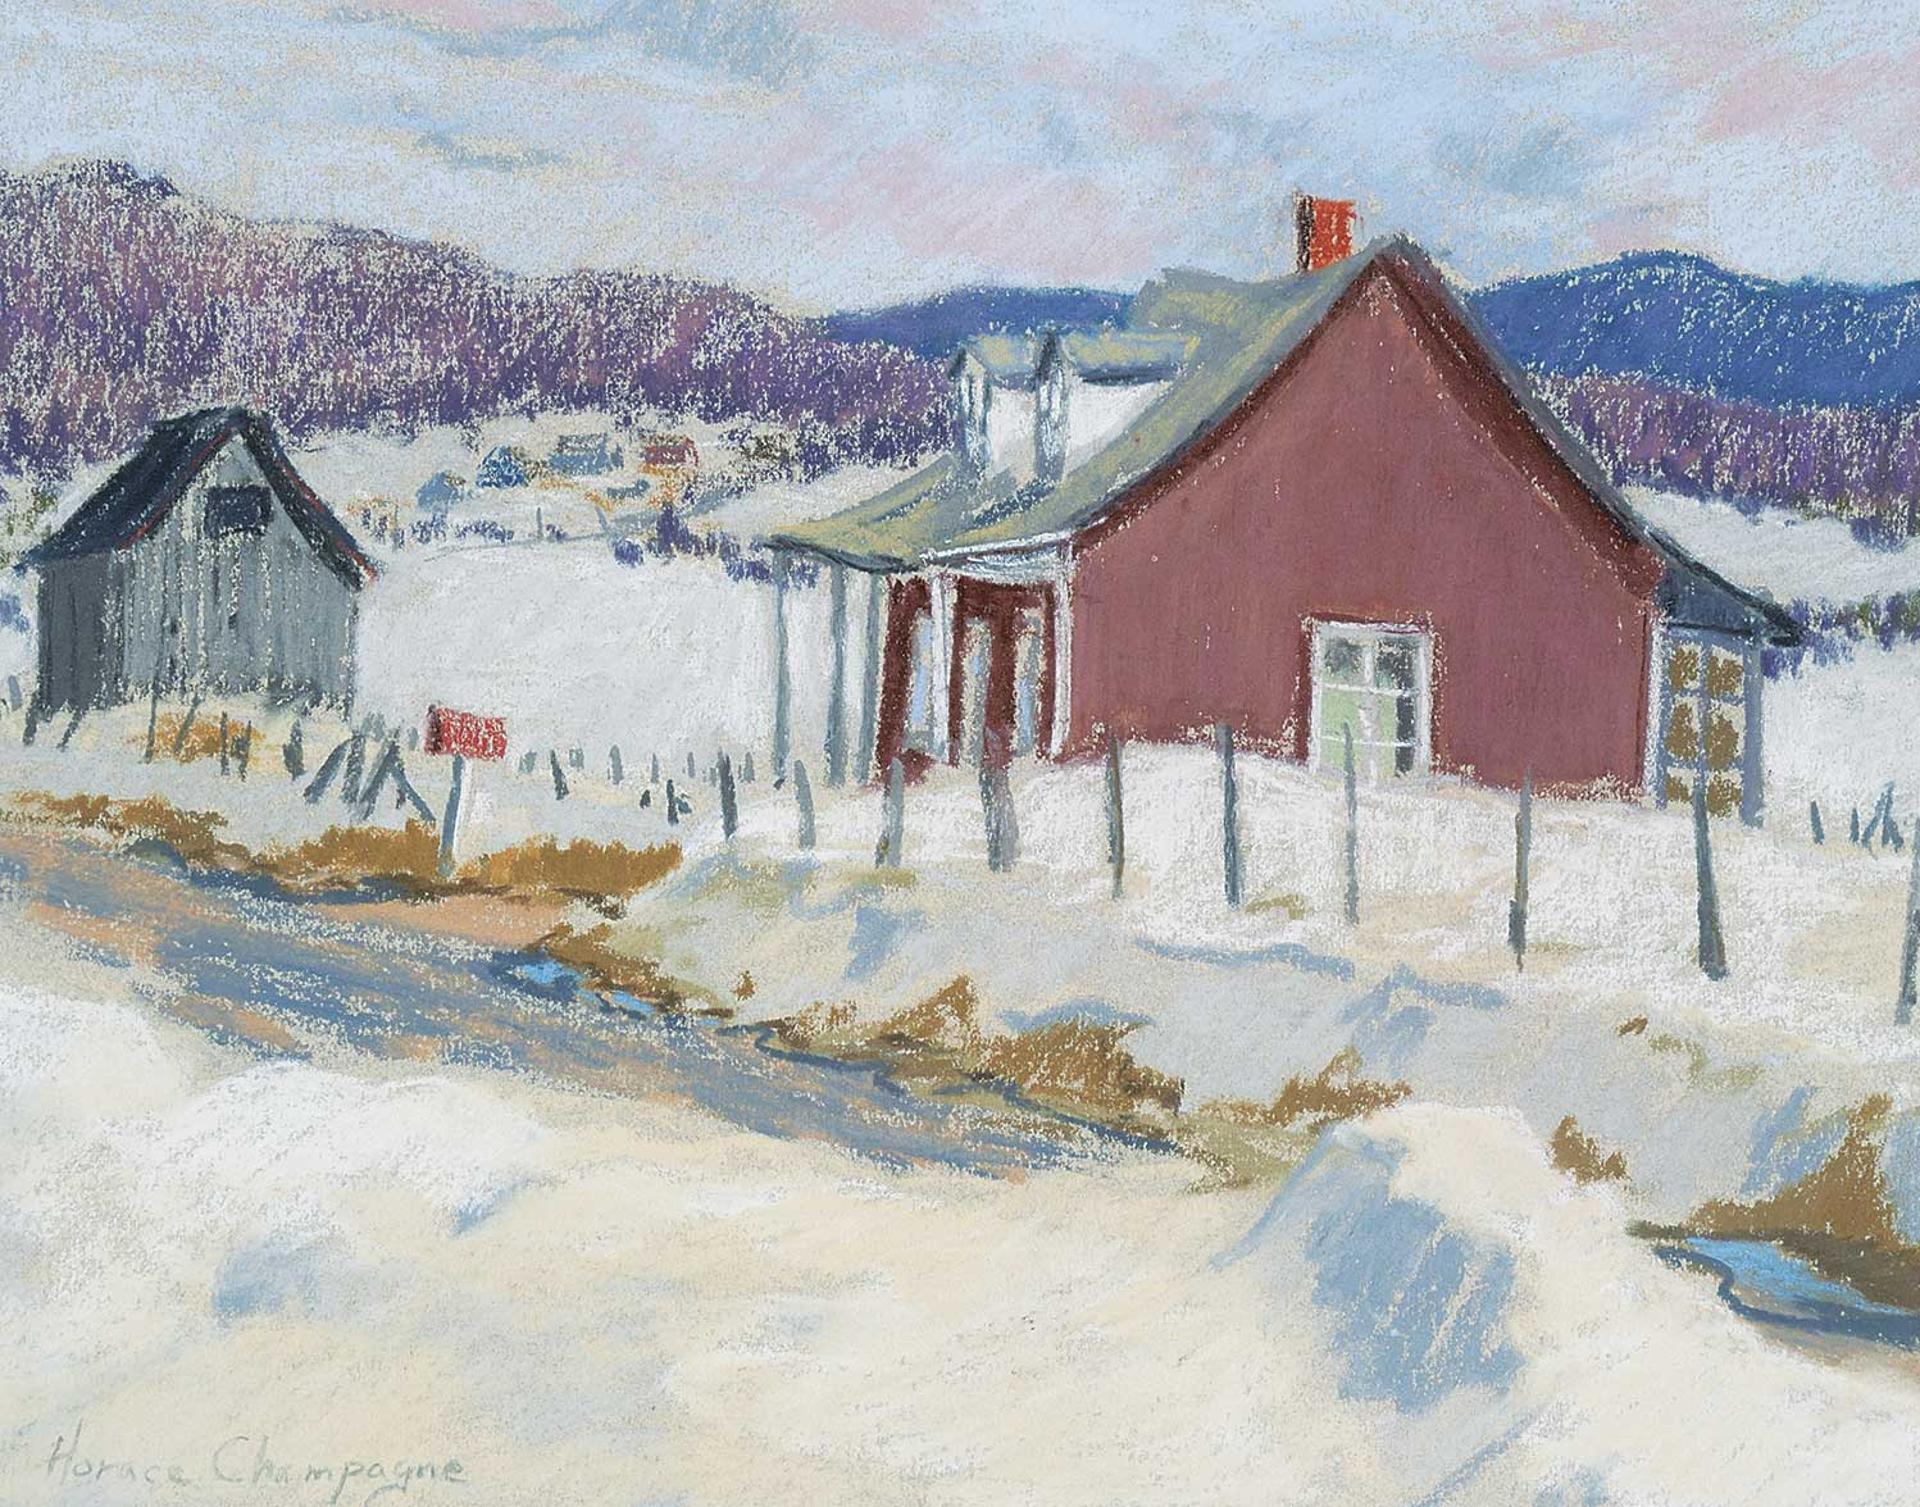 Horace Champagne (1937) - Untitled - Winter Road